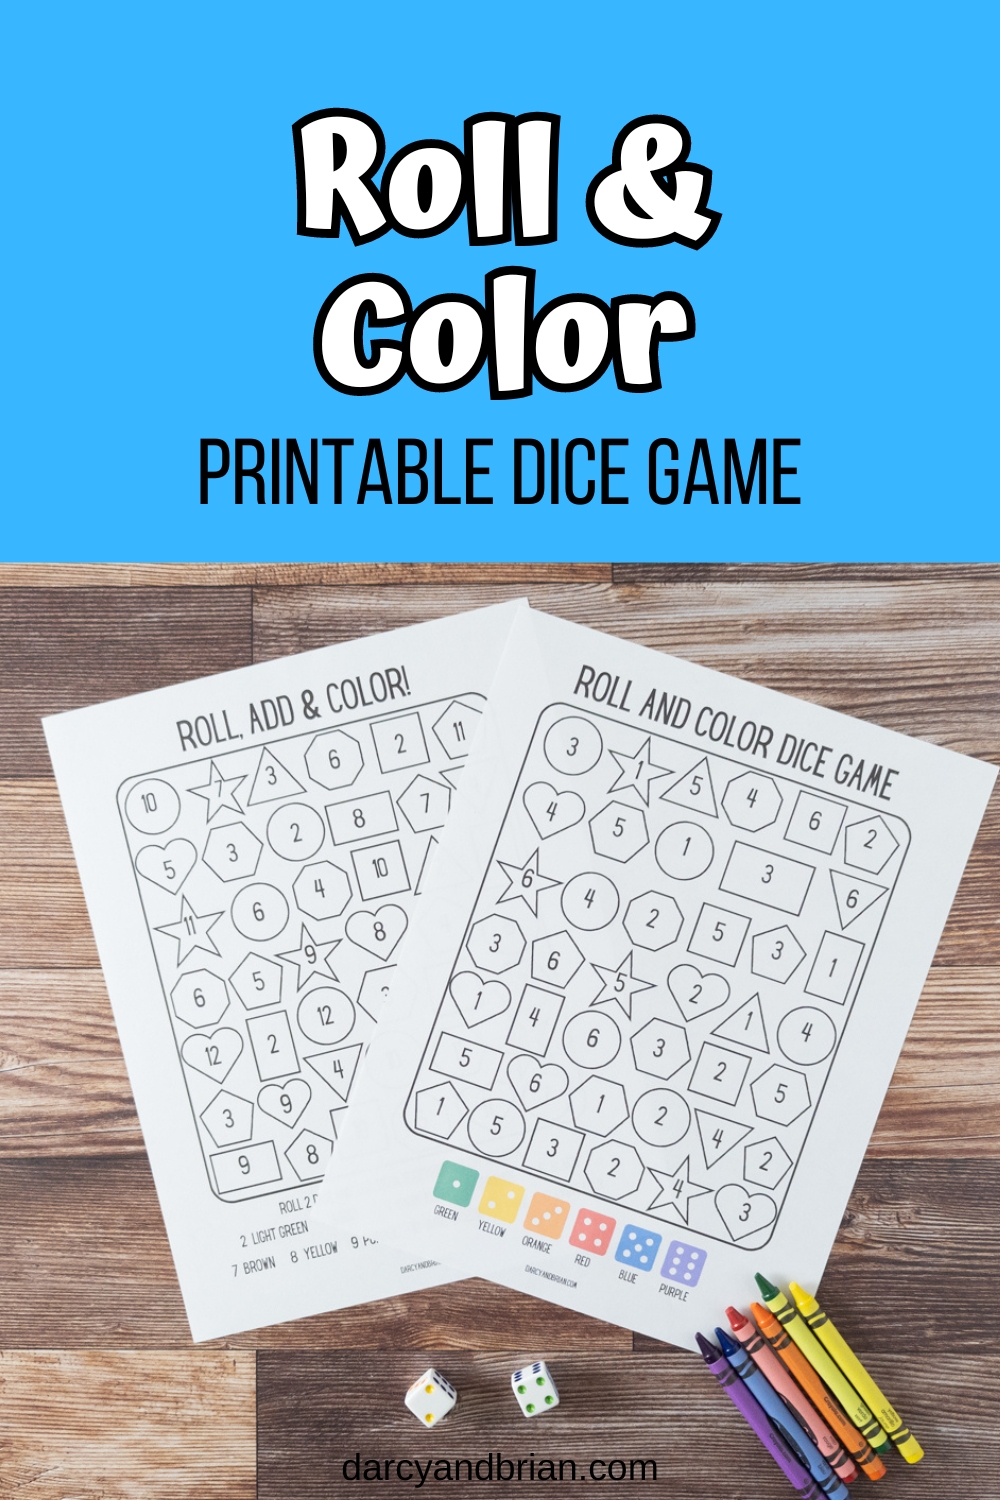 https://www.darcyandbrian.com/wp-content/uploads/2023/09/Roll-and-color-dice-game-pin1-1.jpg